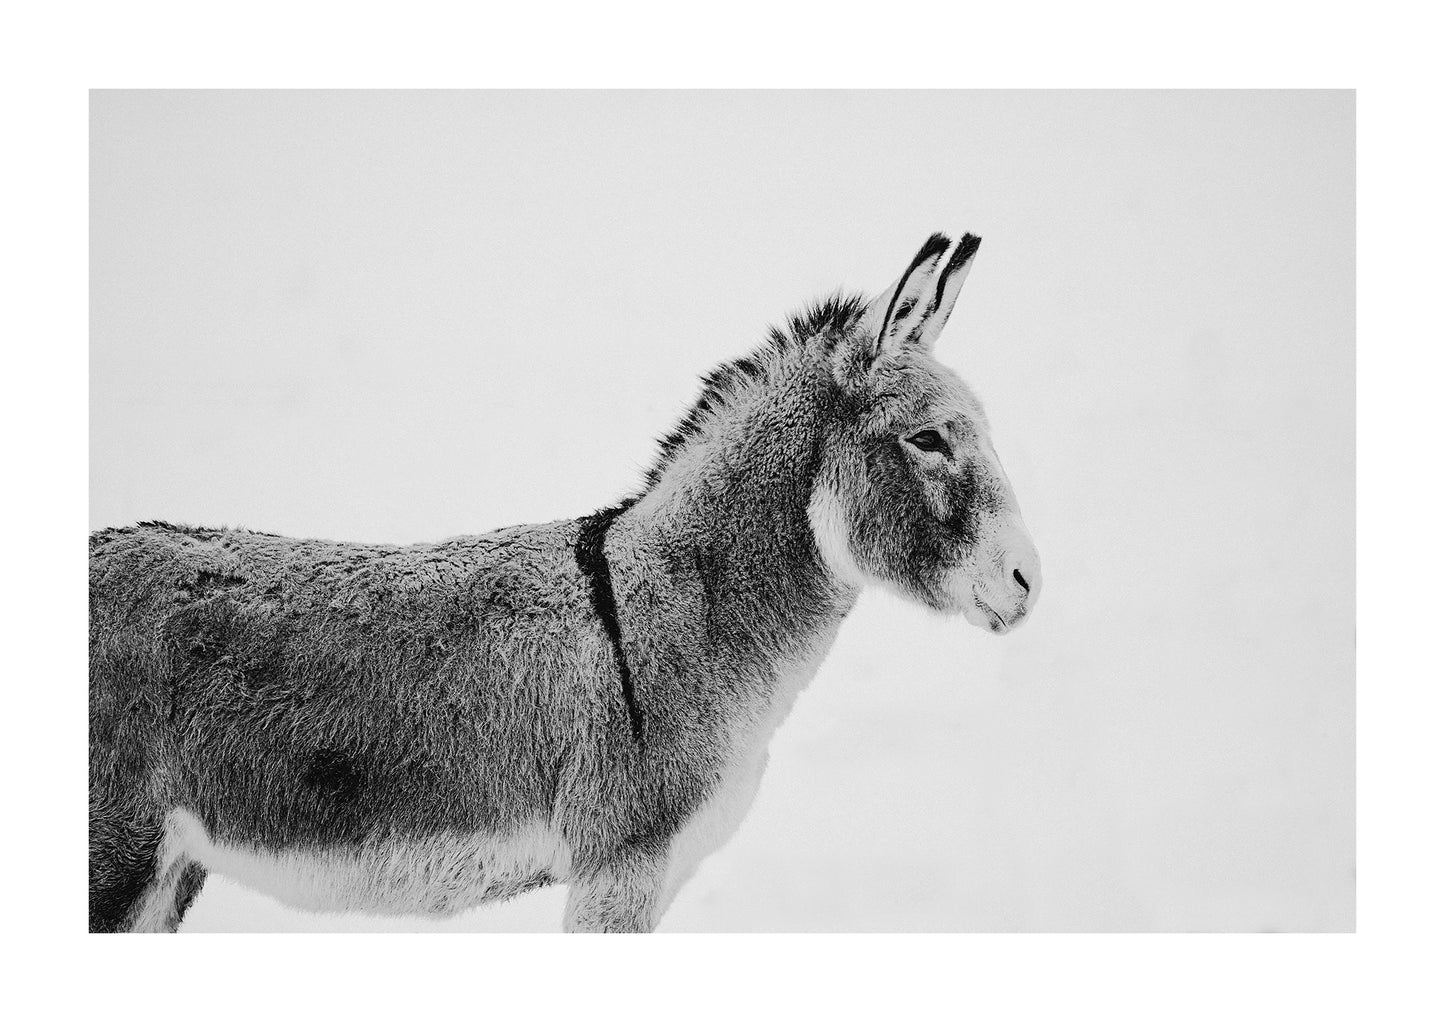 black and white photography of a donkey or burrow